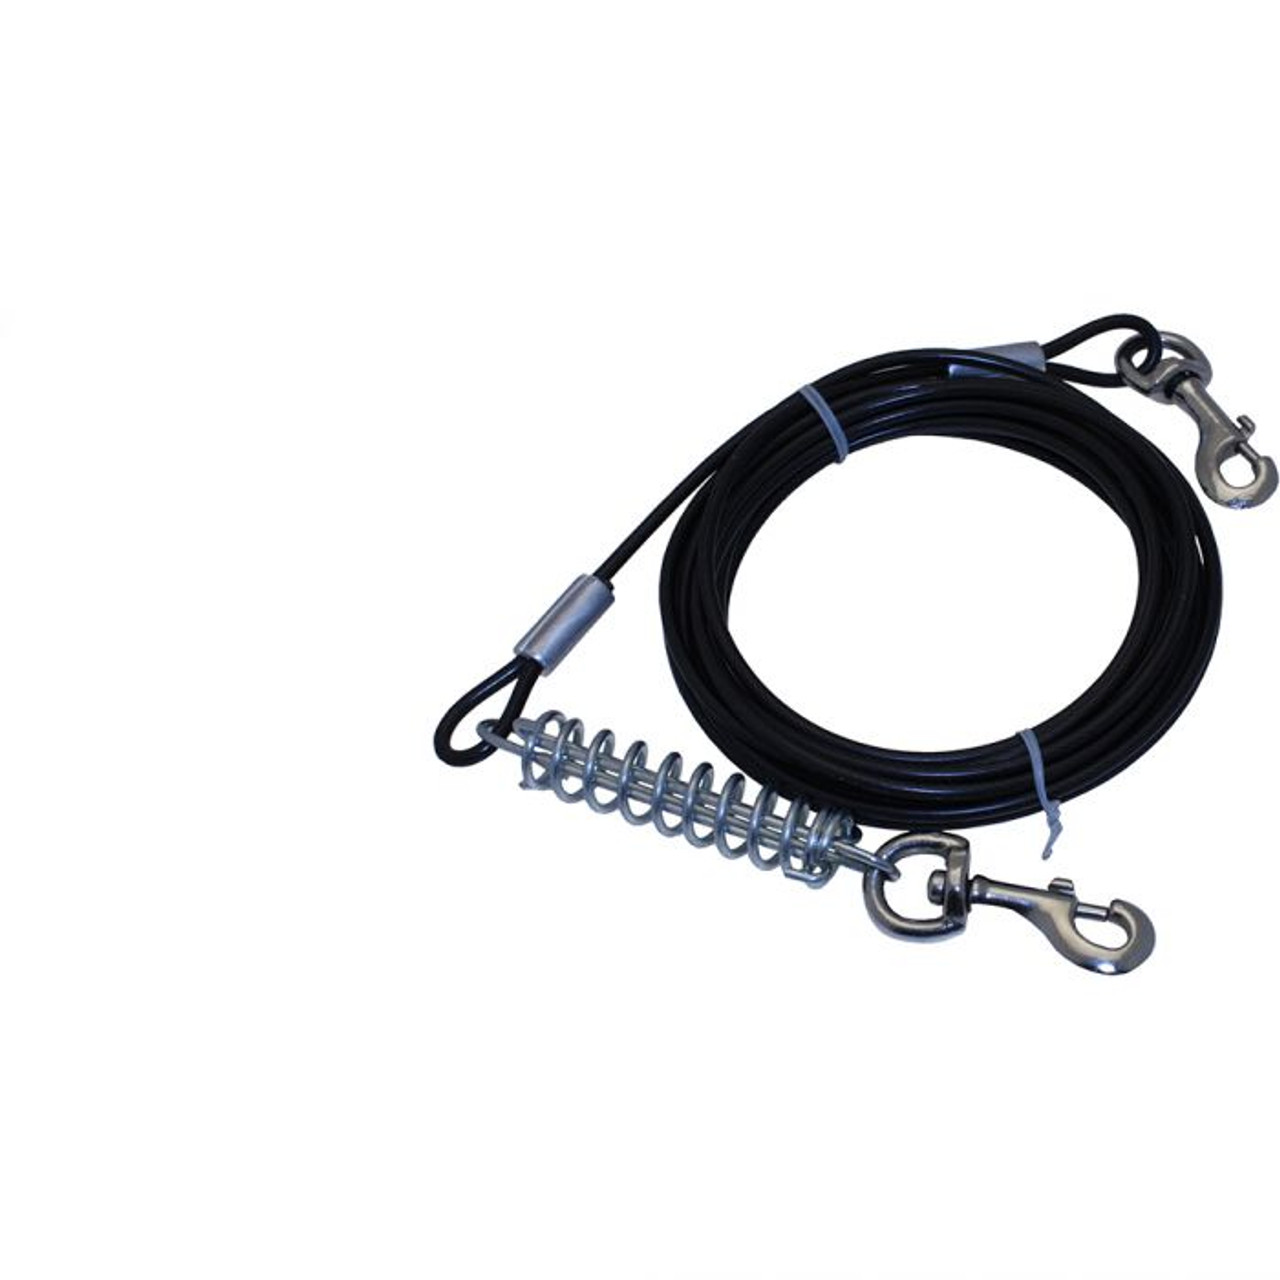 Petgear Dog Tie Out Cable - 12186